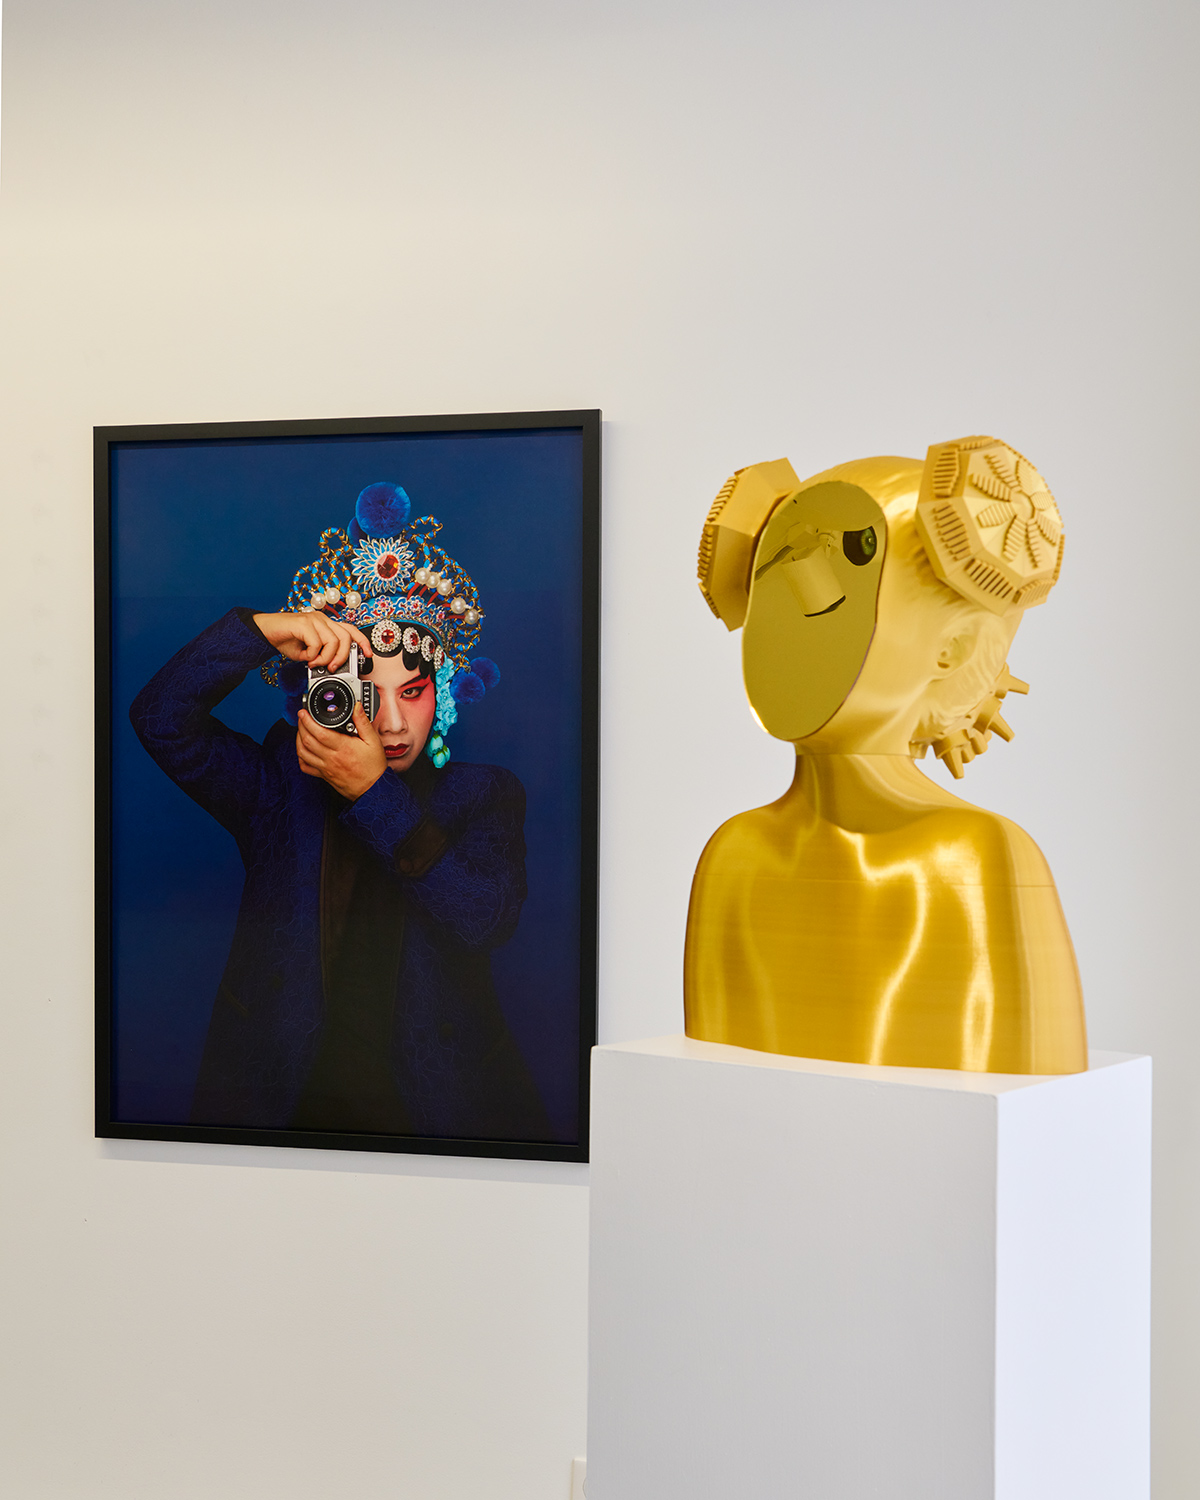 a self-portrait photograph and a gold girl 3D printed sculpture made by Chun Hua Catherine Dong at Galerie Charlot in Paris